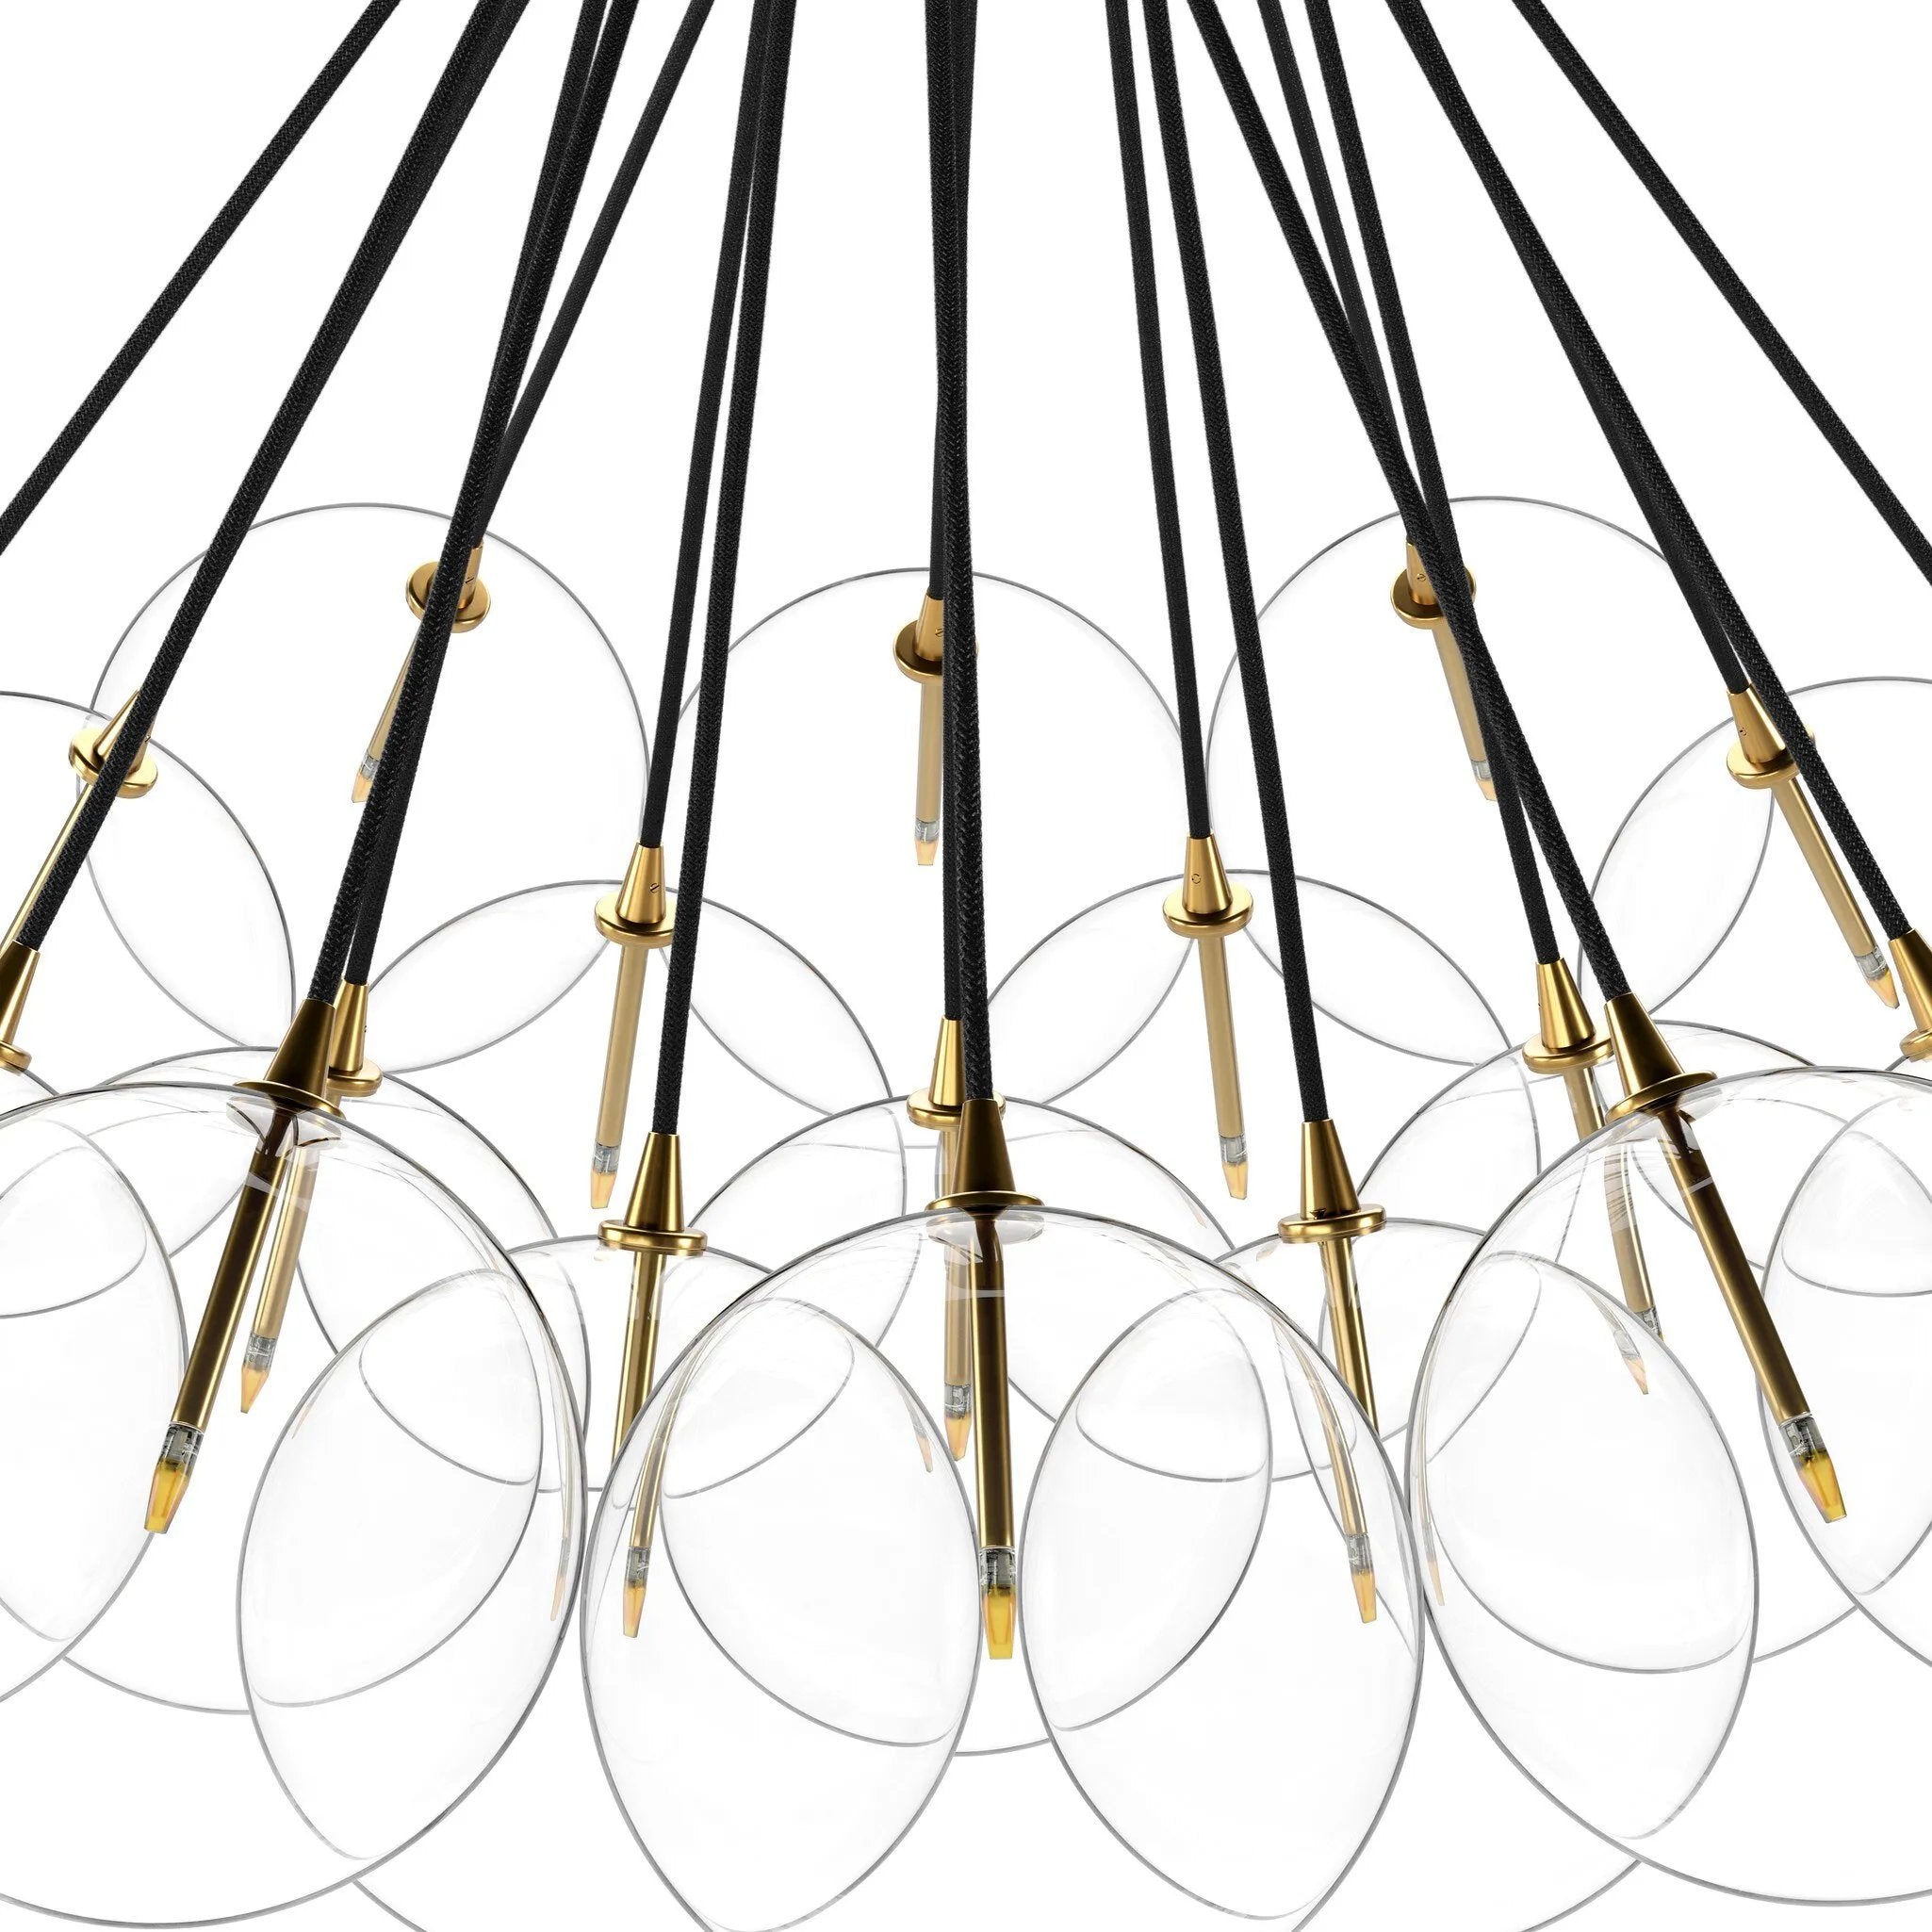 Clear glass bulbs dangle for a statement-making centerpiece. Each globe is individually blown, shaped and sculpted by hand through a one-hour process. Brass and glass are 98% recyclable. Designed and sustainably crafted in Poland by Schwung.Overall Dimensions47.00"w x 47.00"d x 33.50"hFull Details &amp; SpecificationsTear Shee Amethyst Home provides interior design, new home construction design consulting, vintage area rugs, and lighting in the Alpharetta metro area.